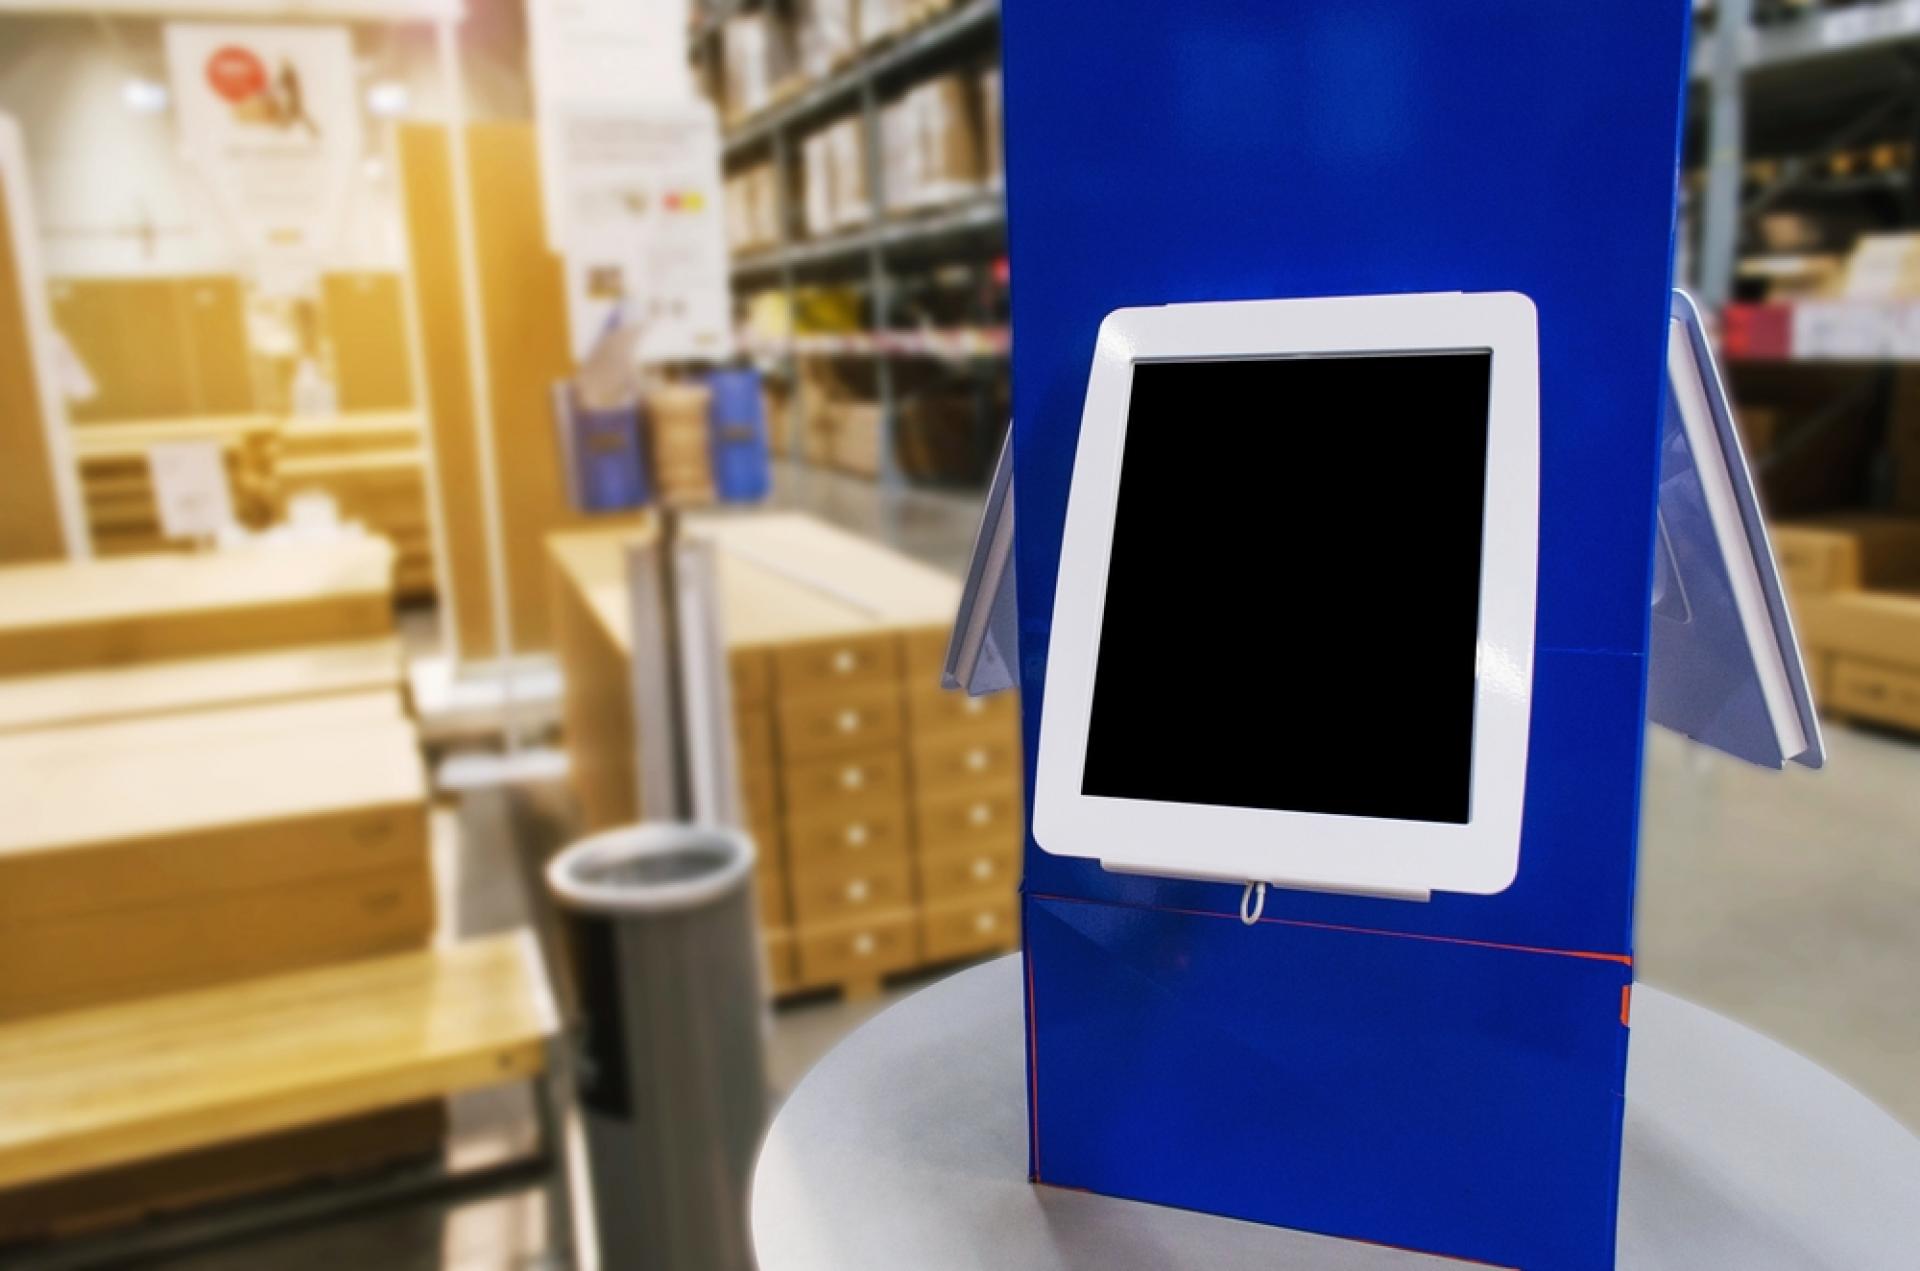 How can digital signage improve Health and Safety in the workplace?